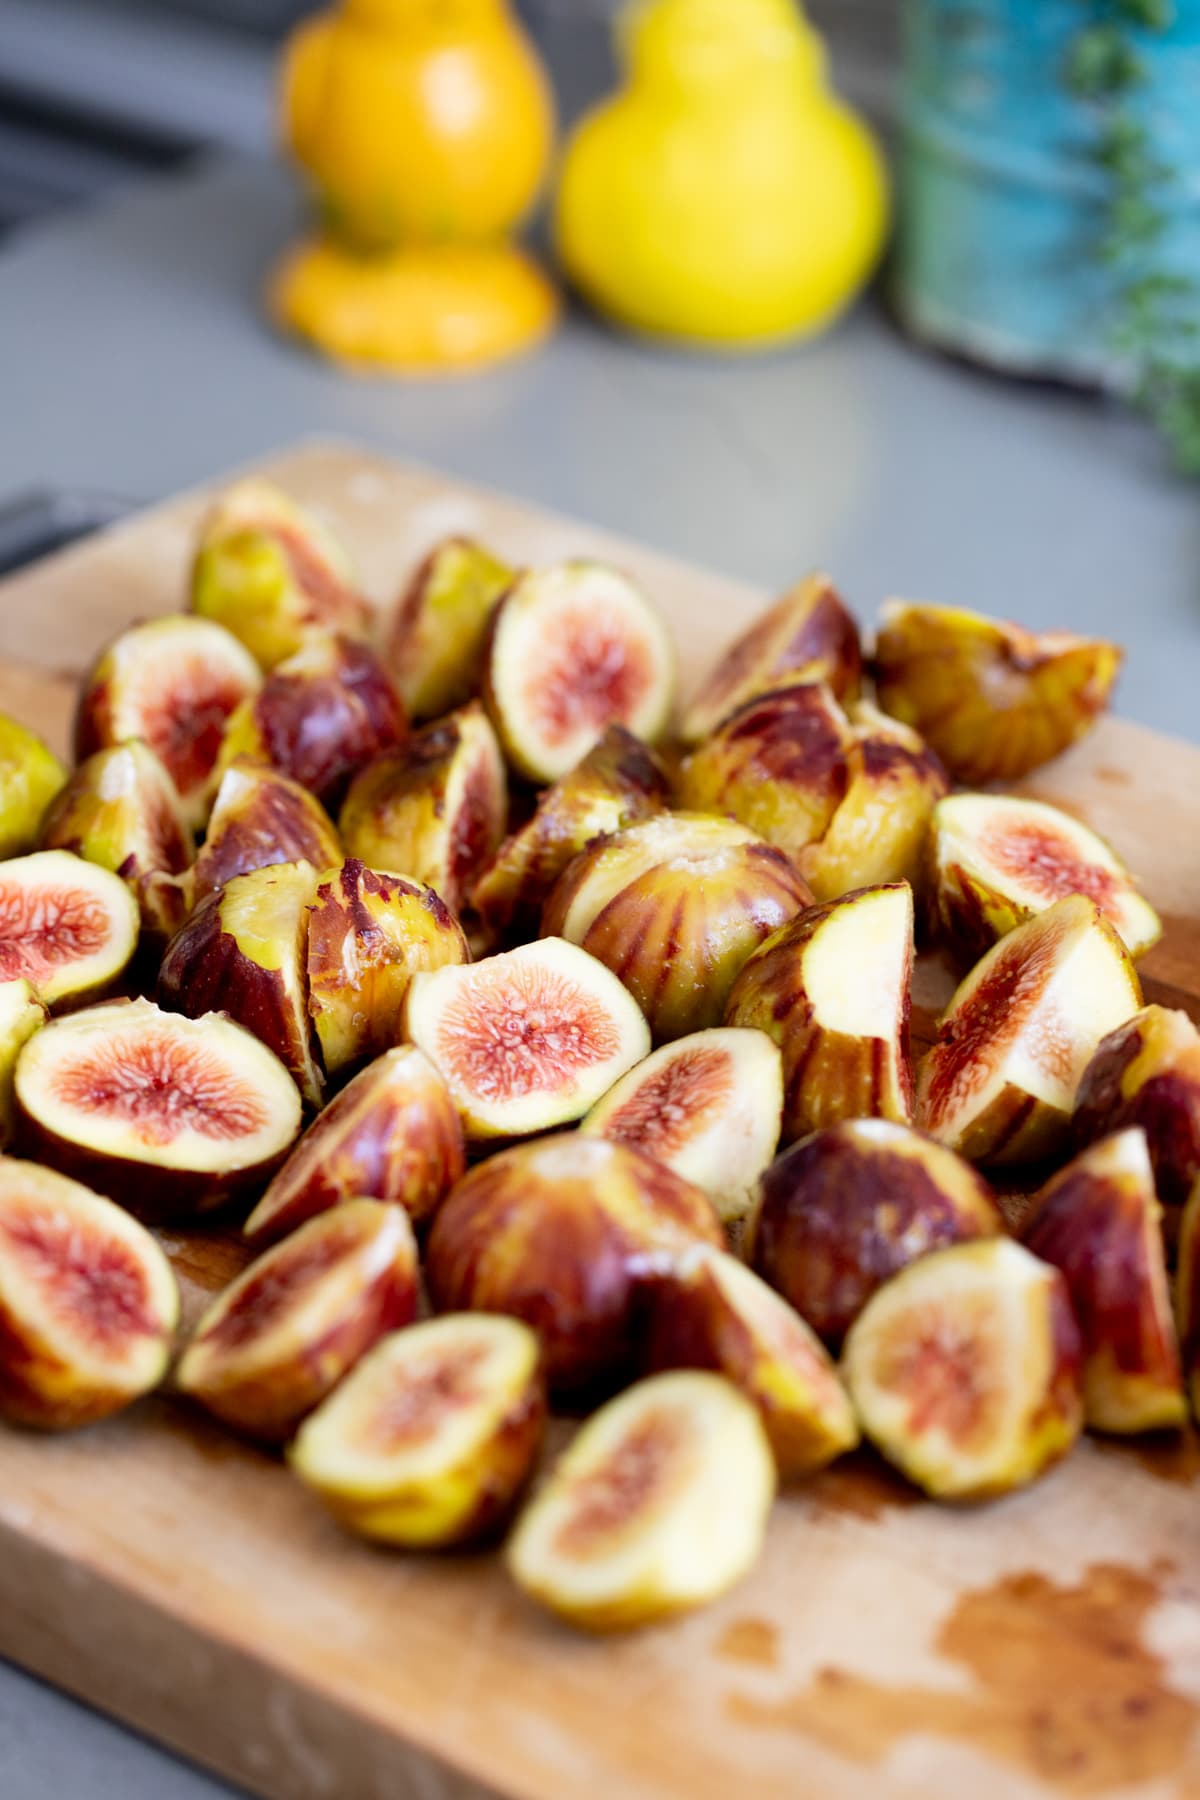 fresh figs ready for cooking